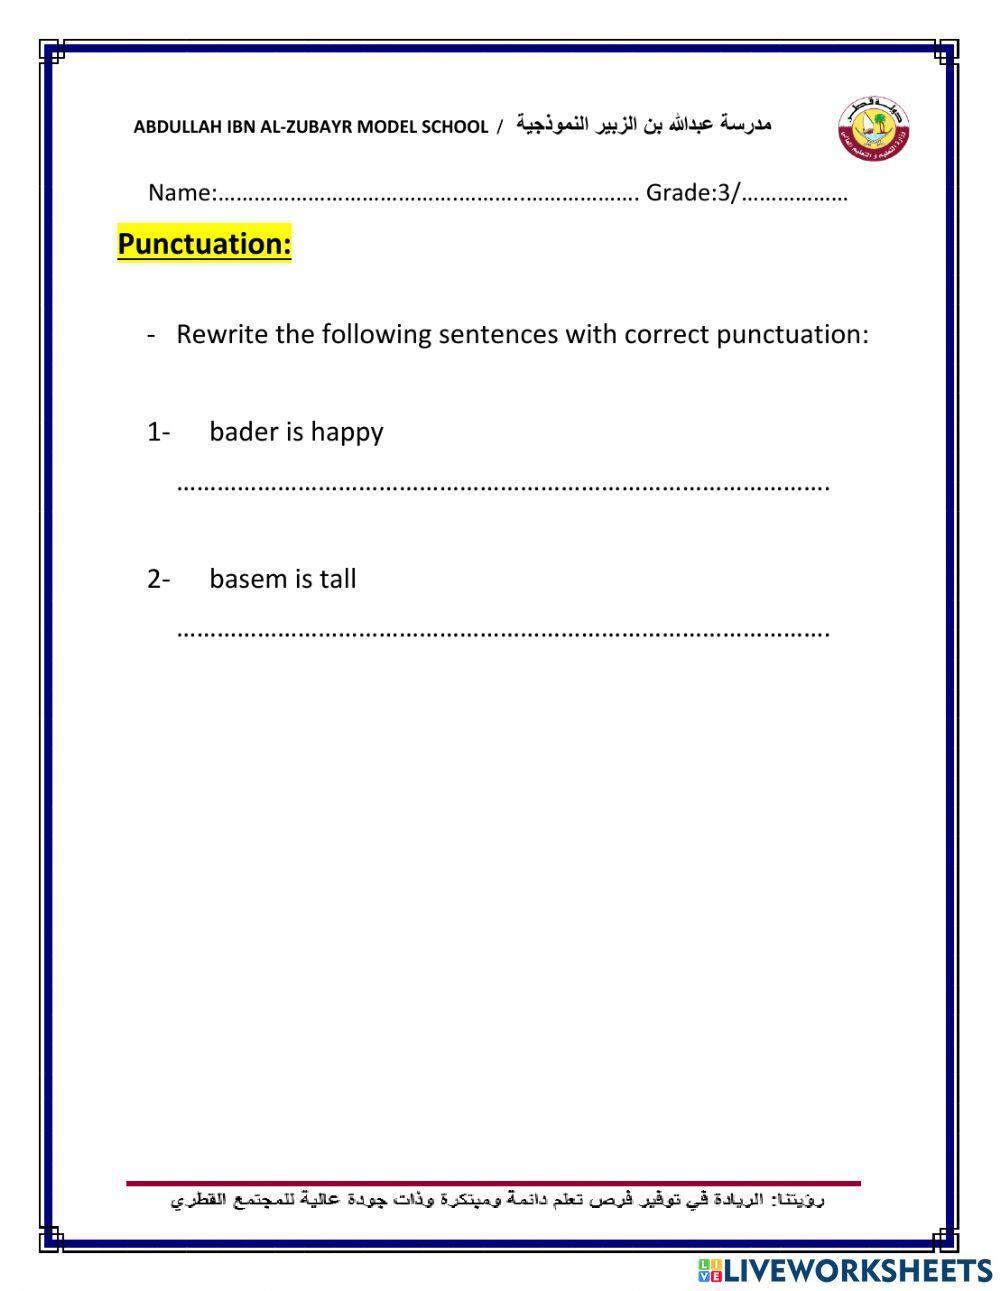 Punctuation exercise